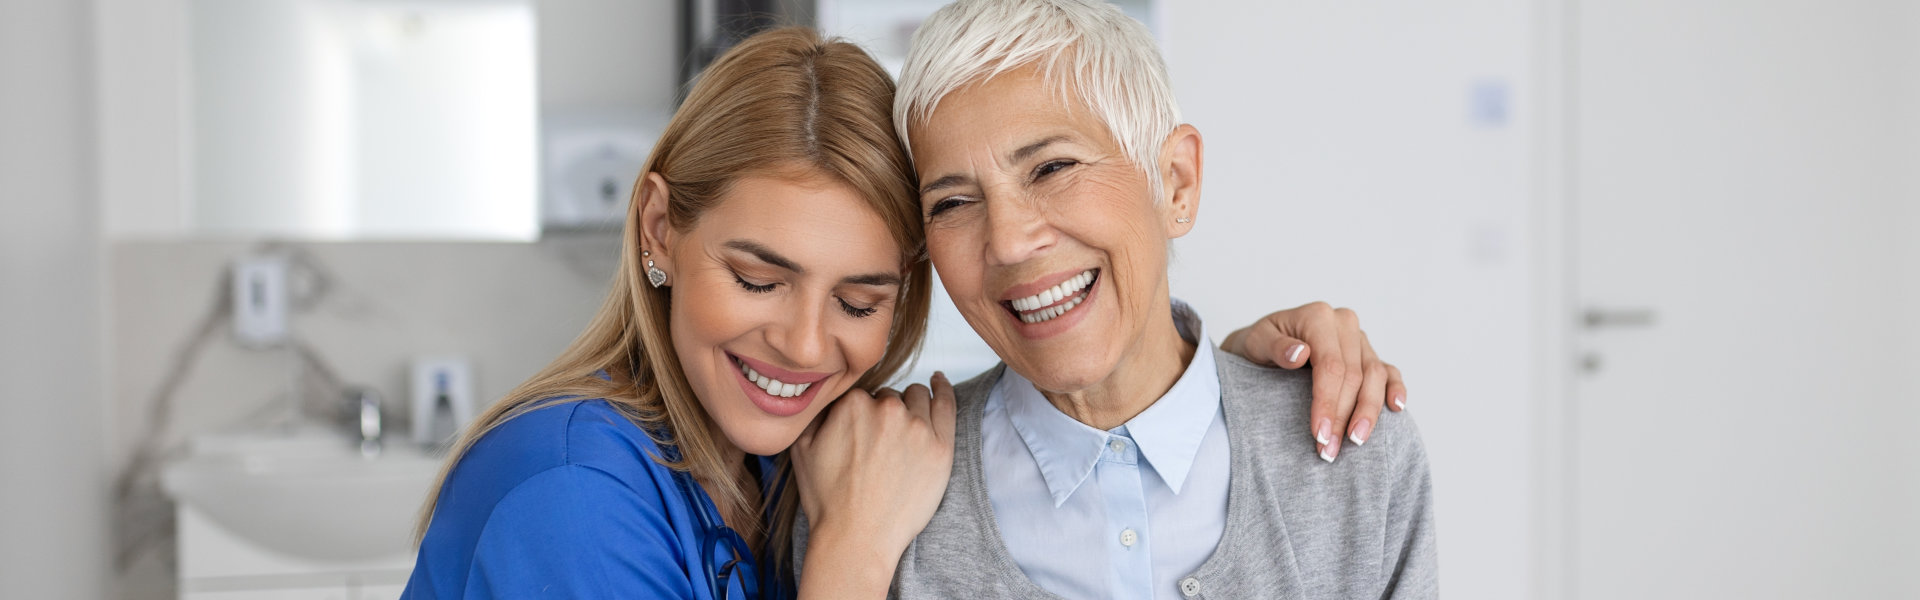 caregiver embracing the elderly woman